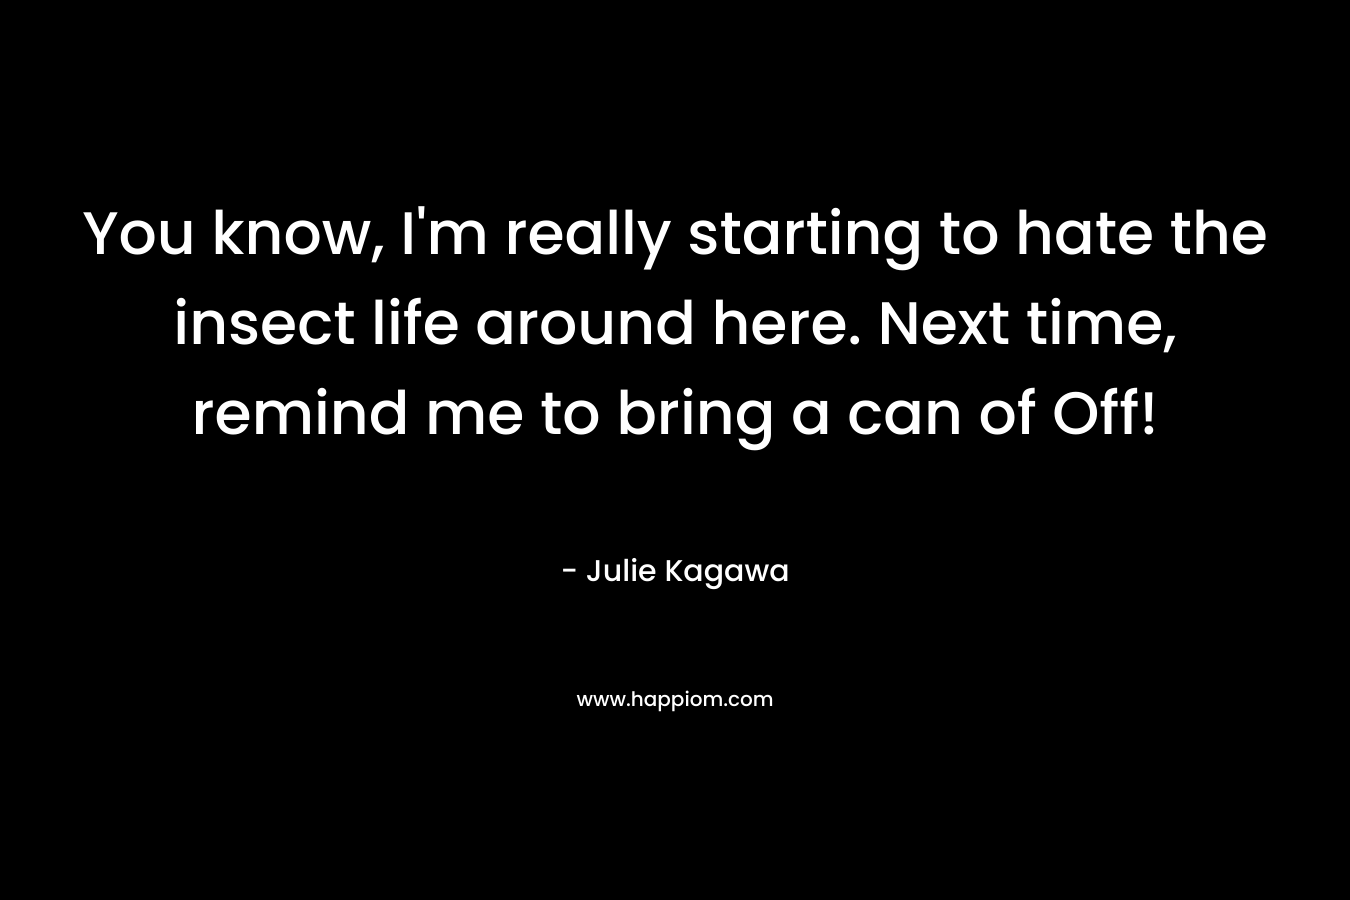 You know, I’m really starting to hate the insect life around here. Next time, remind me to bring a can of Off! – Julie Kagawa